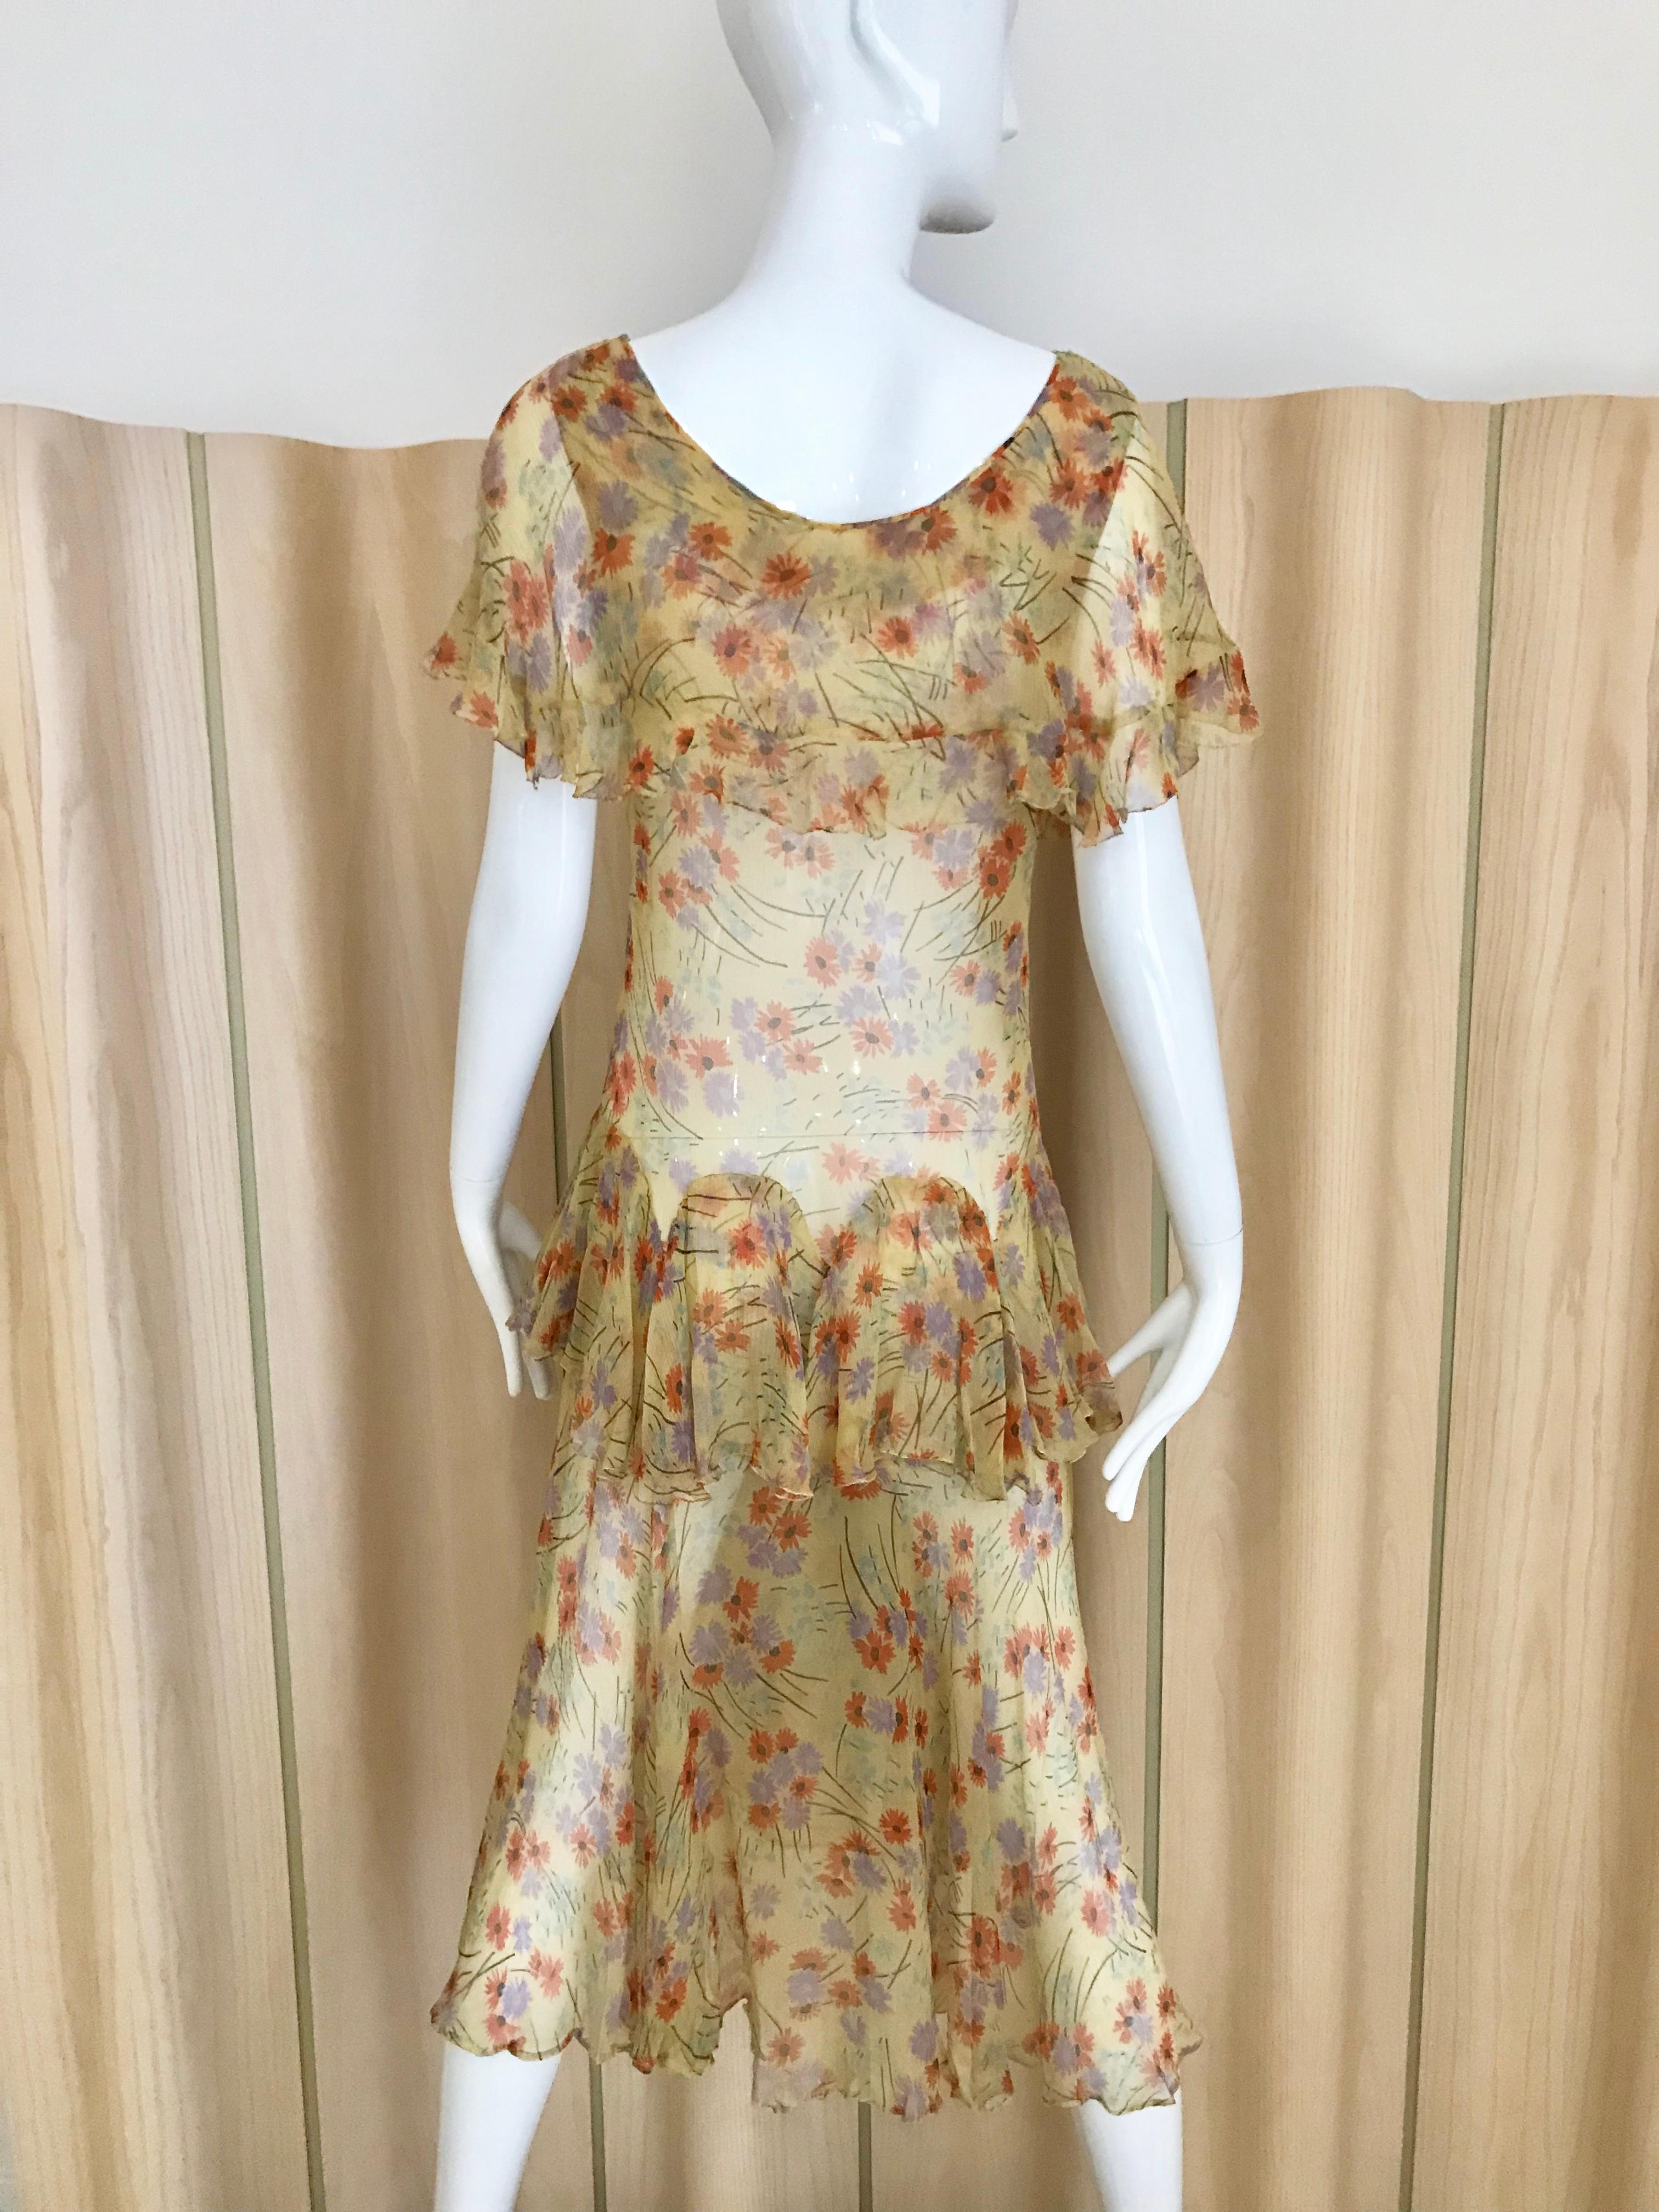 1920s Silk Dress in orange, purple black eye susan sun flower print.
Some flaws inside lining ( collar) see image attached
Bust: 36 inches/ Waist: 32 inches/ Hip : 36 inches/ Dress length: 43 inches